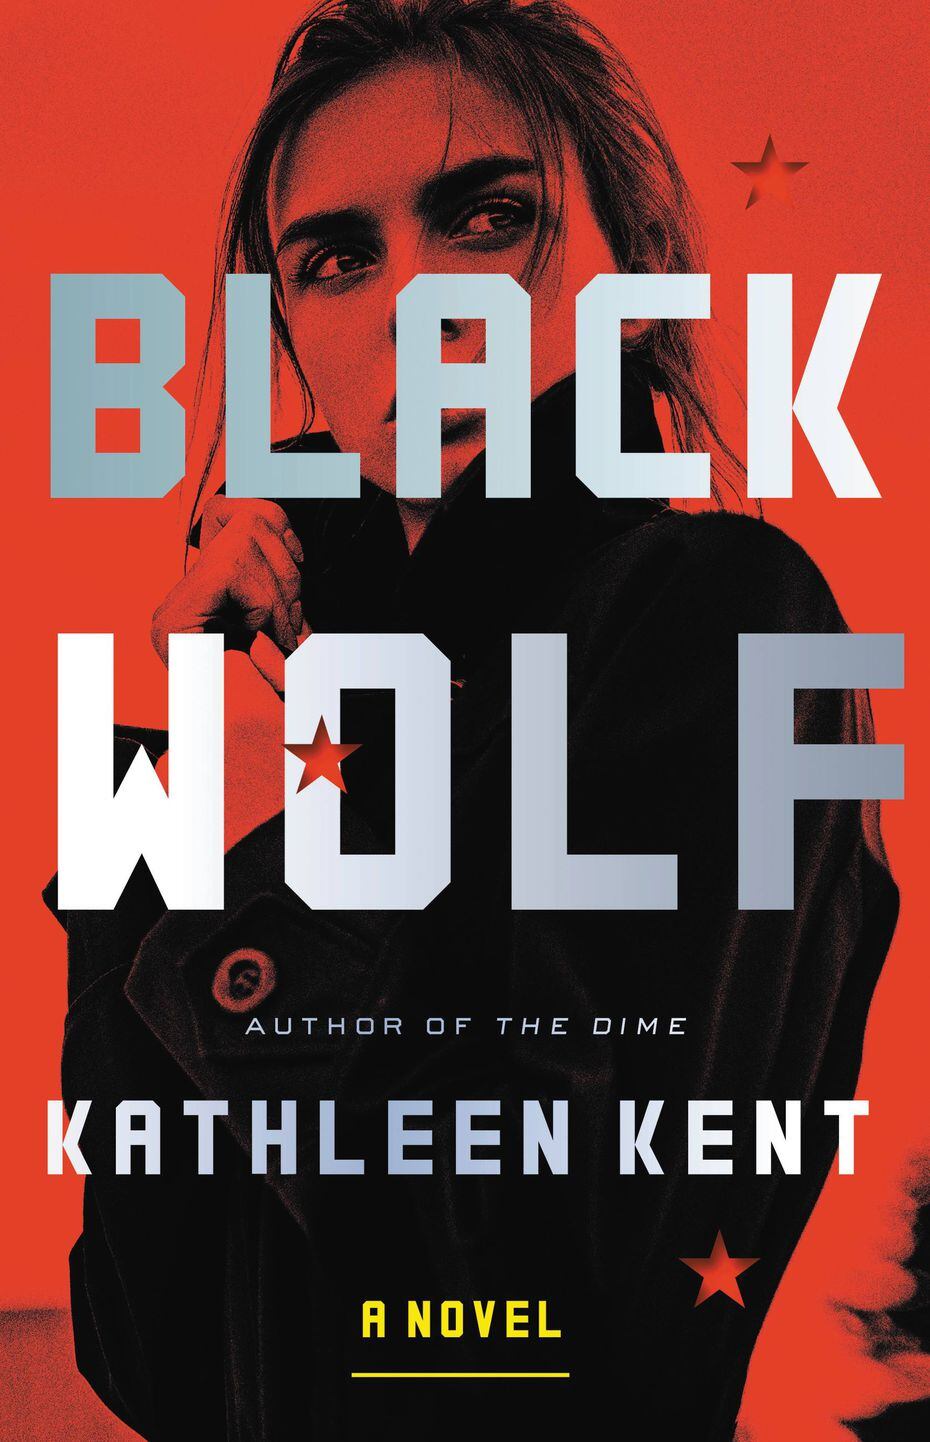 Kathleen Kent's "Black Wolf" is a thriller about a CIA agent who is a “super recognizer,”...